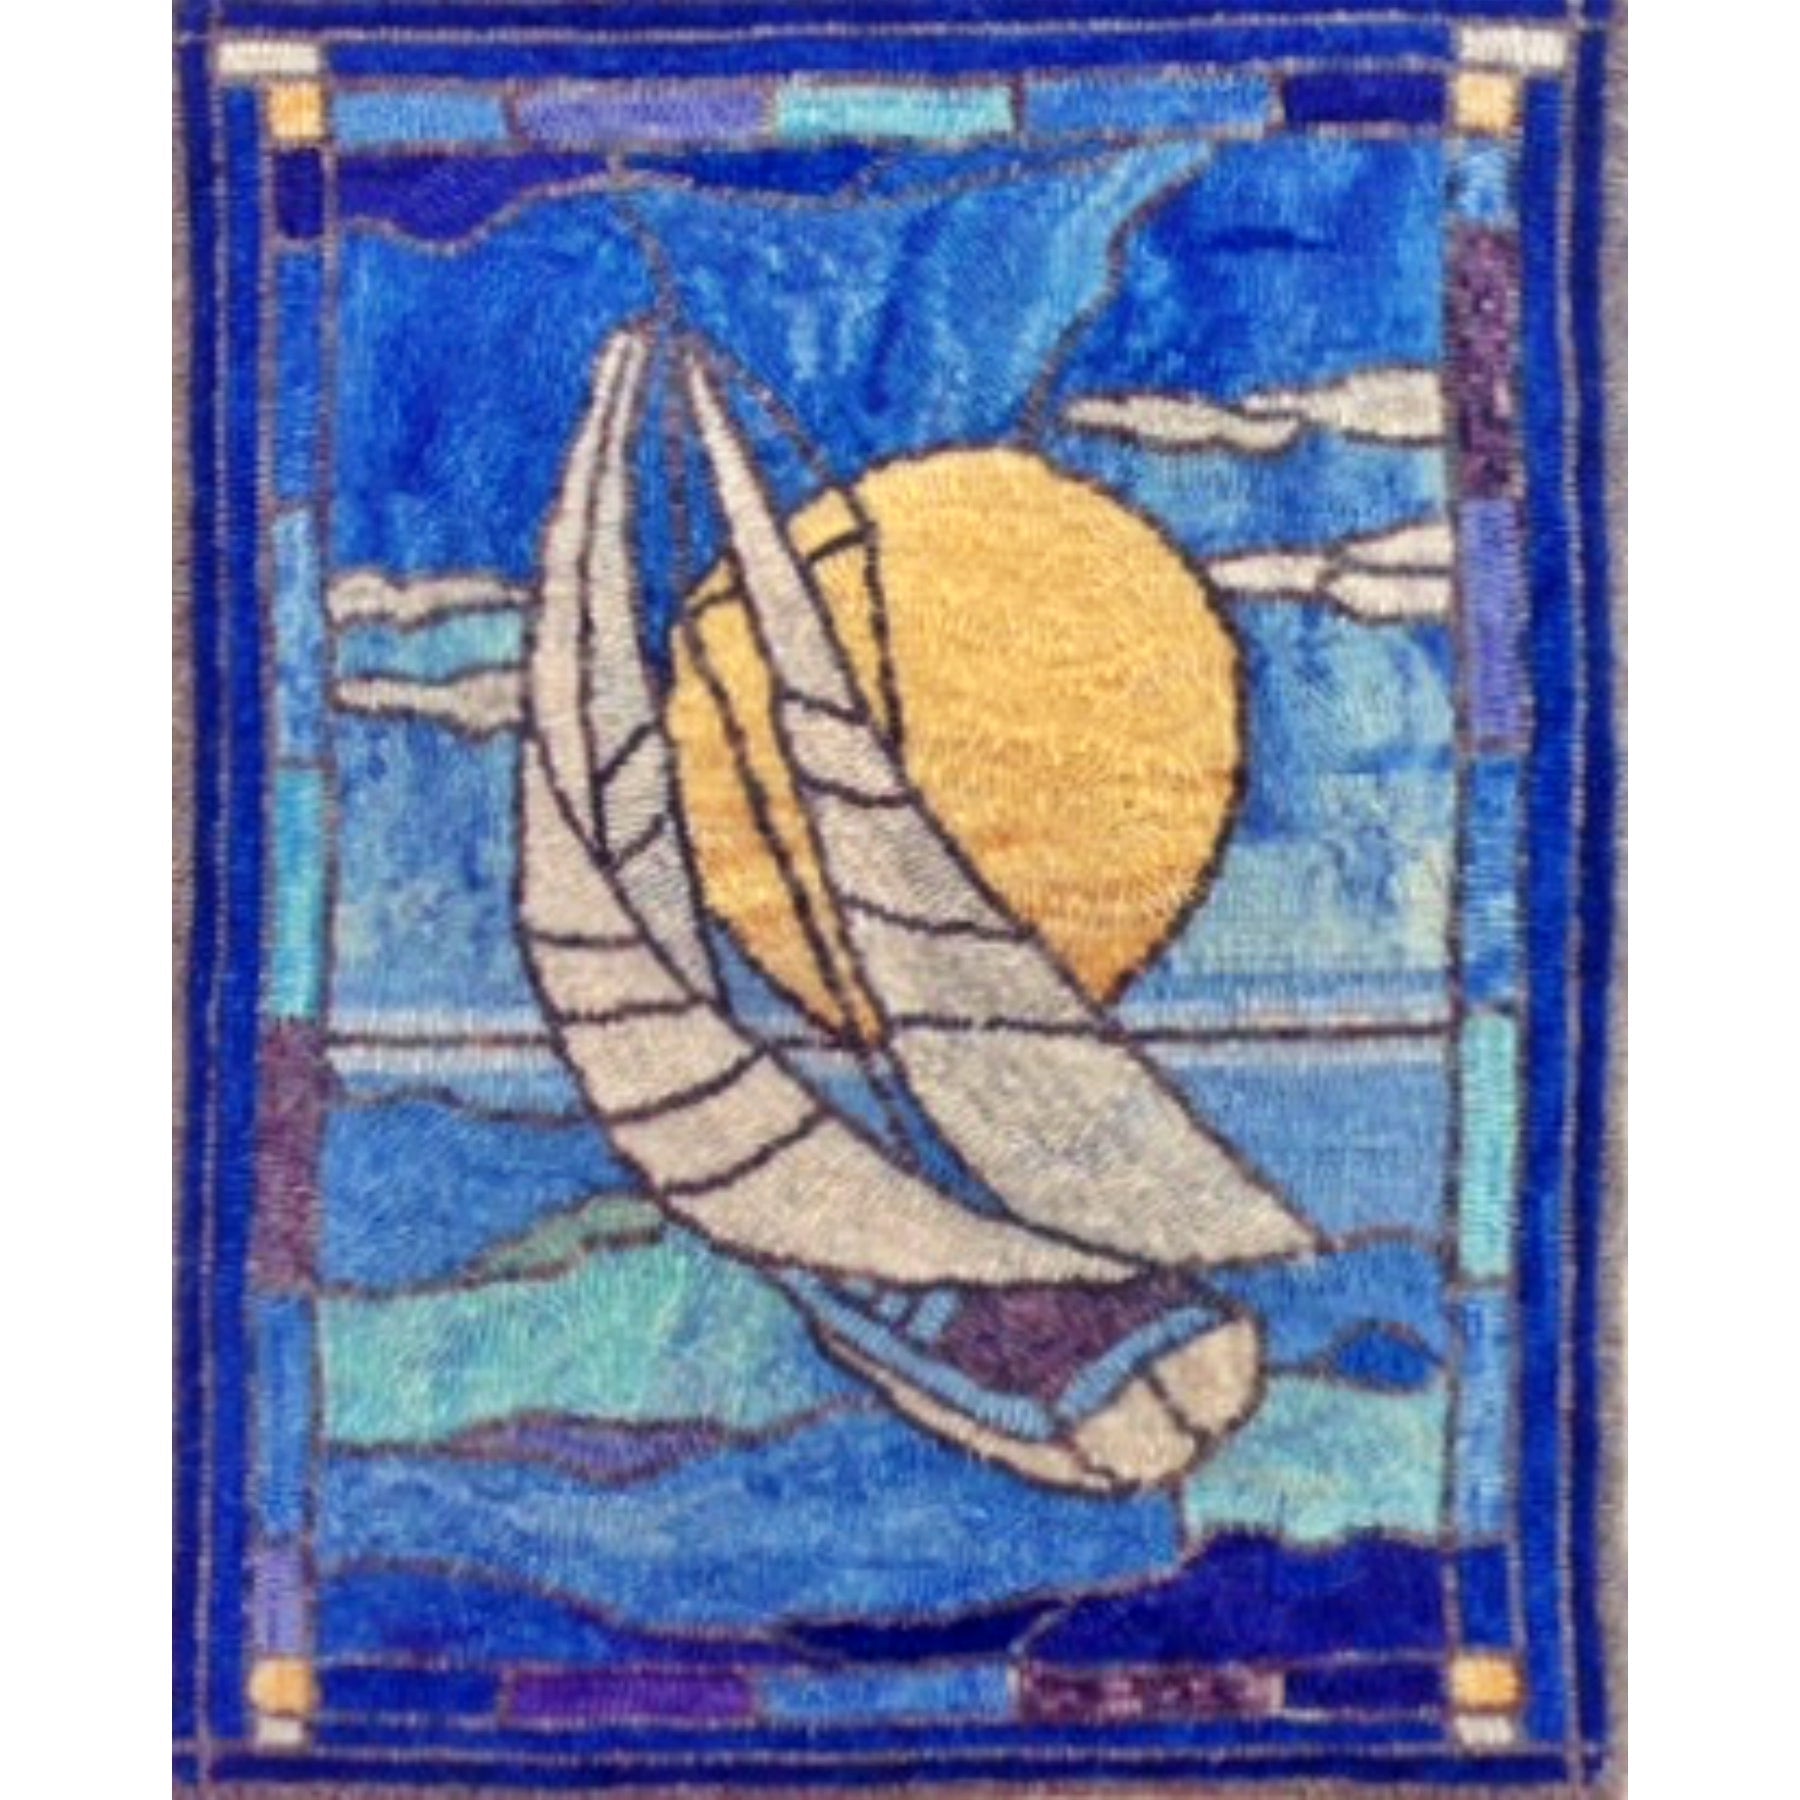 Stained Glass Boat, rug hooked by Claire Ketelaar